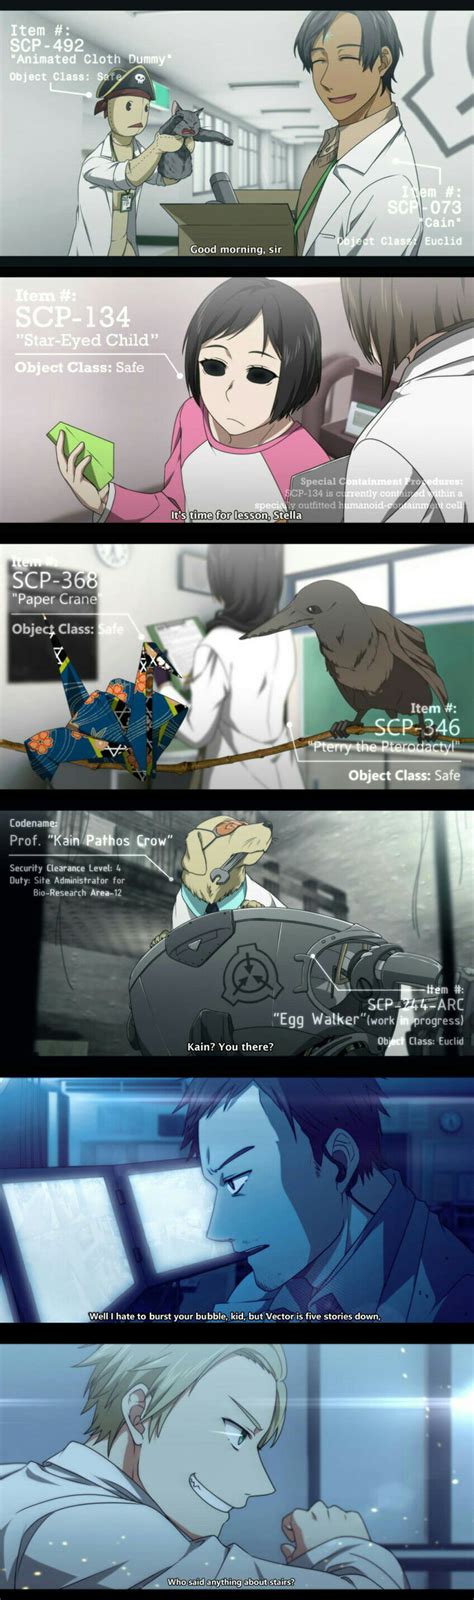 Aggregate 69 Anime Scp Latest Vn